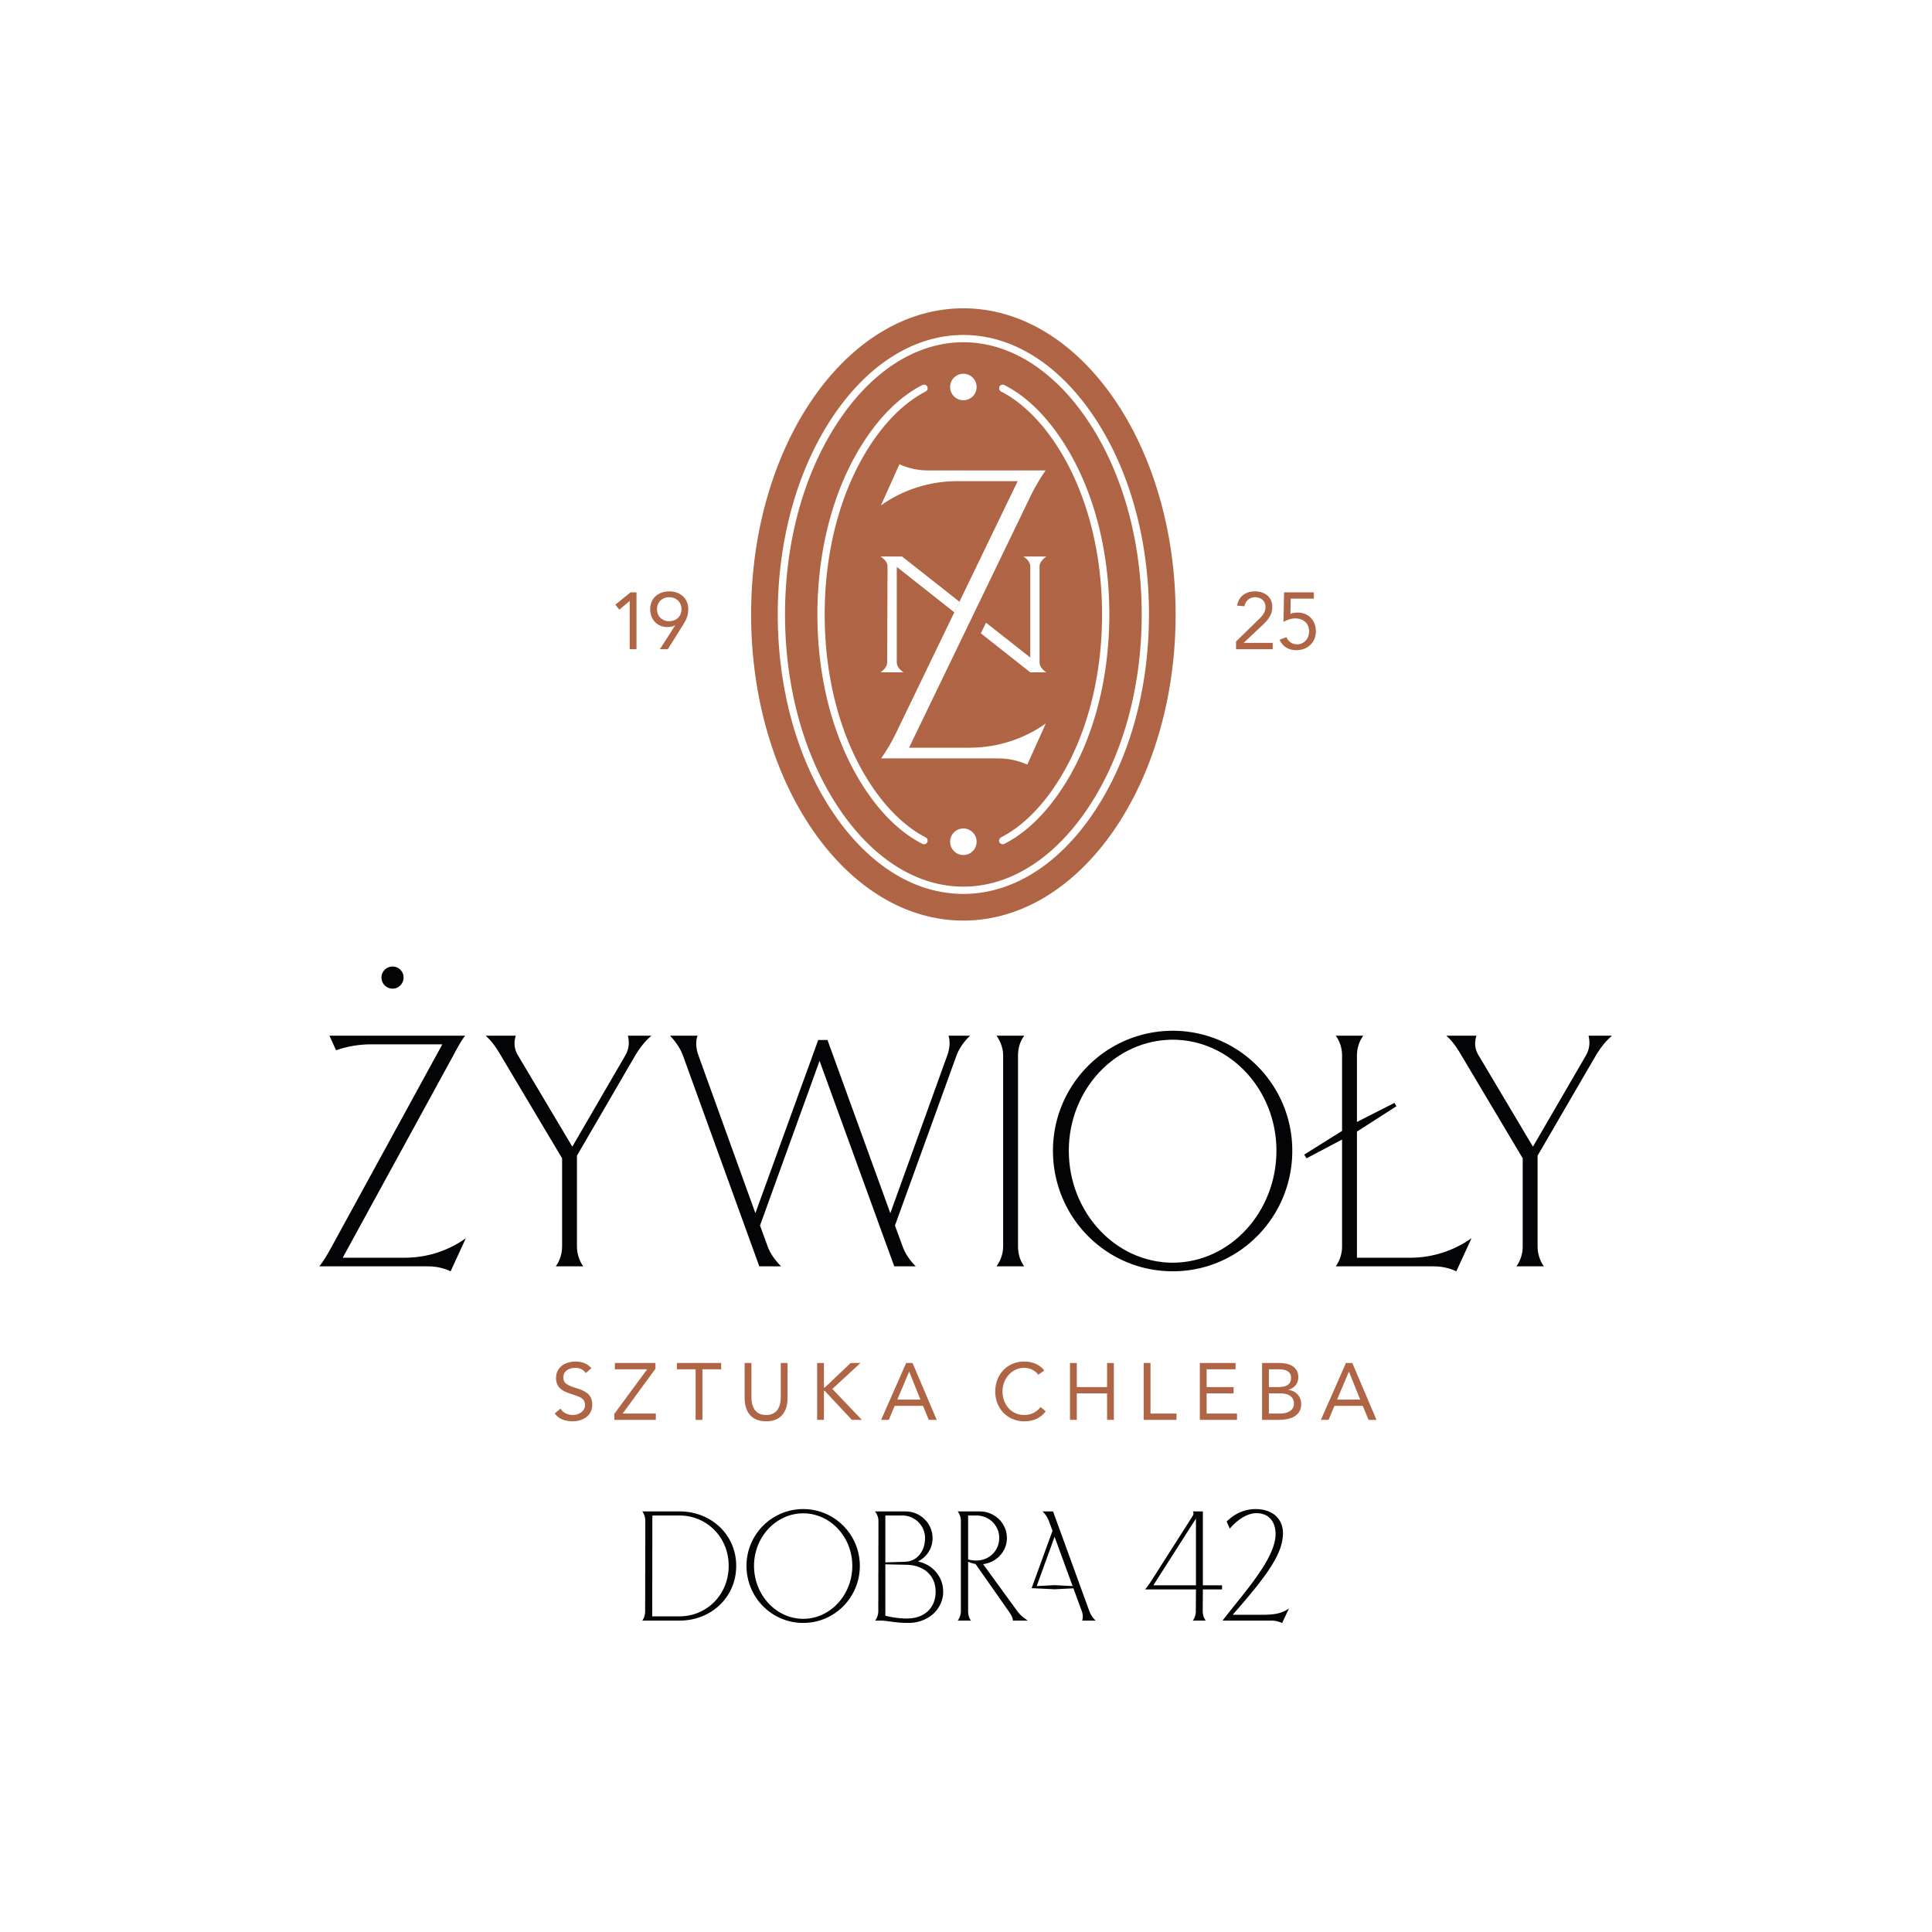 Piekarnia Zywioly logo design by logo designer Sparrow Design for your inspiration and for the worlds largest logo competition